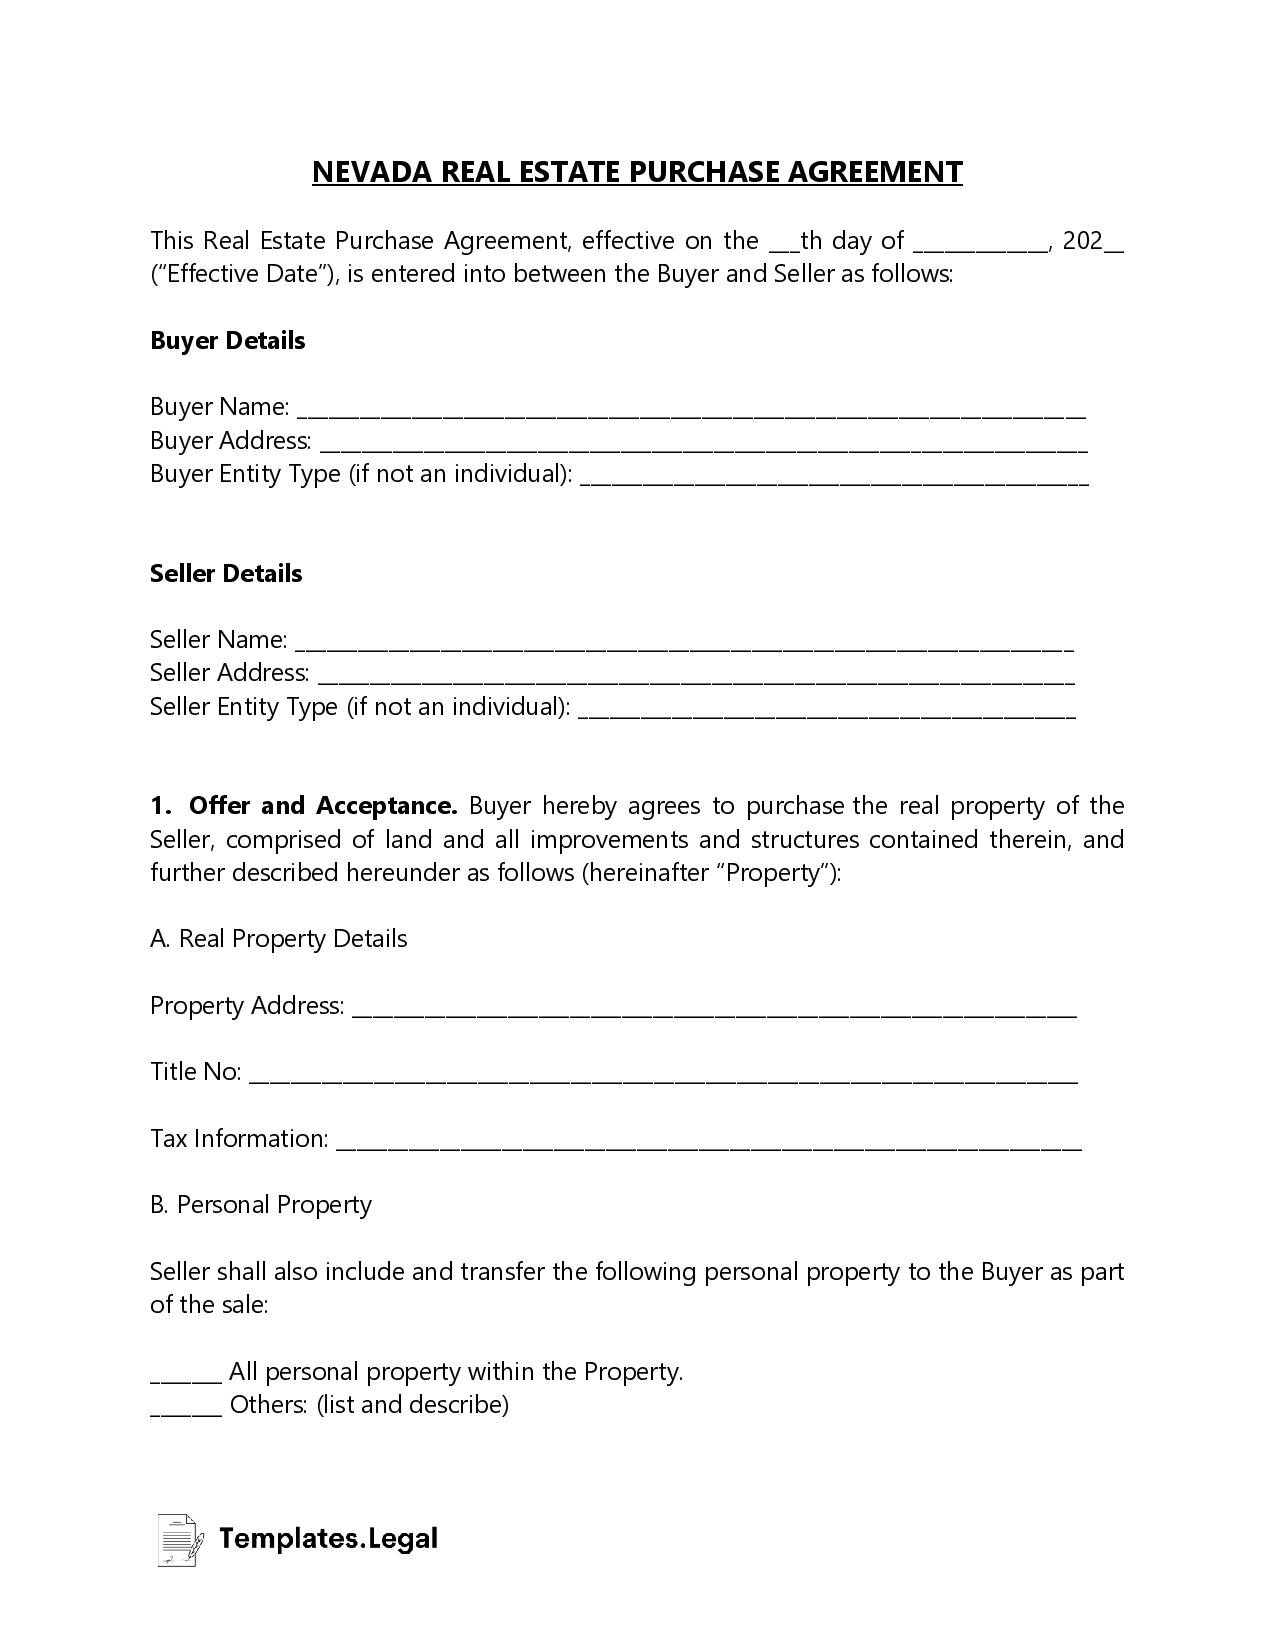 Nevada Real Estate Purchase Agreement - Templates.Legal